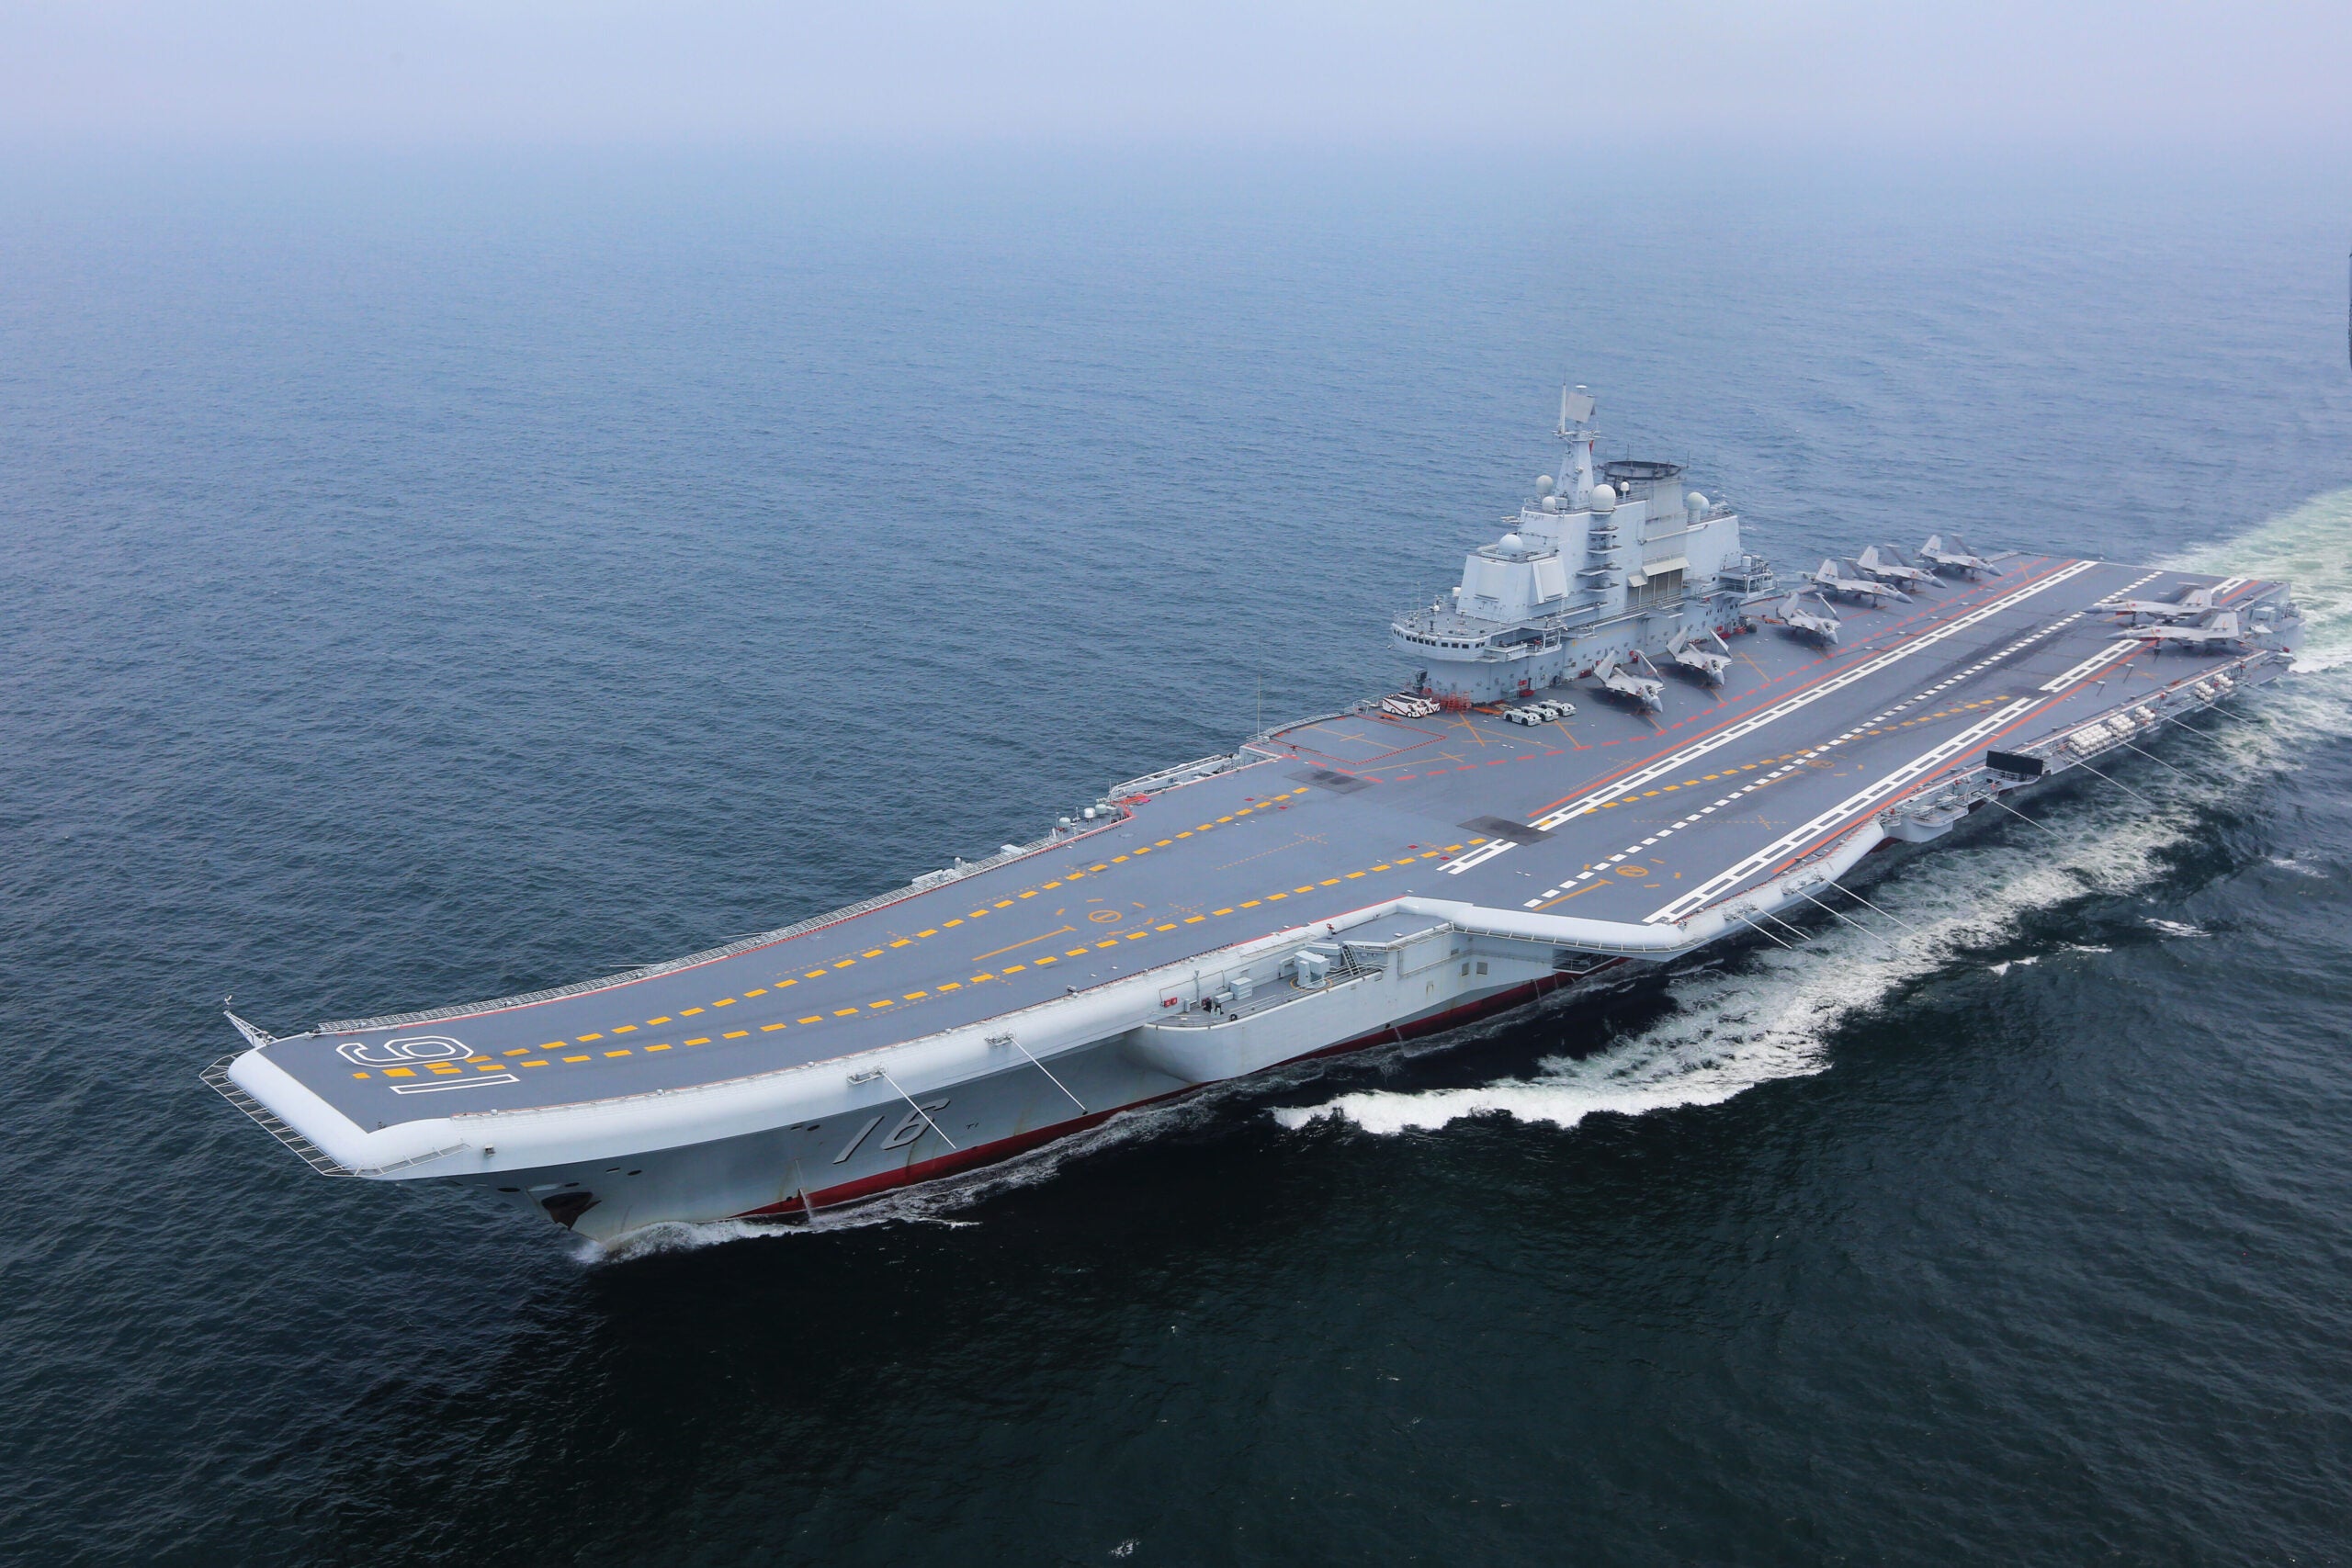 ABOARD LIAONING AIRCRAFT CARRIER, July 13, 2017 -- China's aircraft carrier Liaoning is seen during a new training mission upon arrival at an unidentified sea area, July 13, 2017. Chinese aircraft carrier formation conducted coordination training on Thursday. (Xinhua/Zeng Tao via Getty Images)